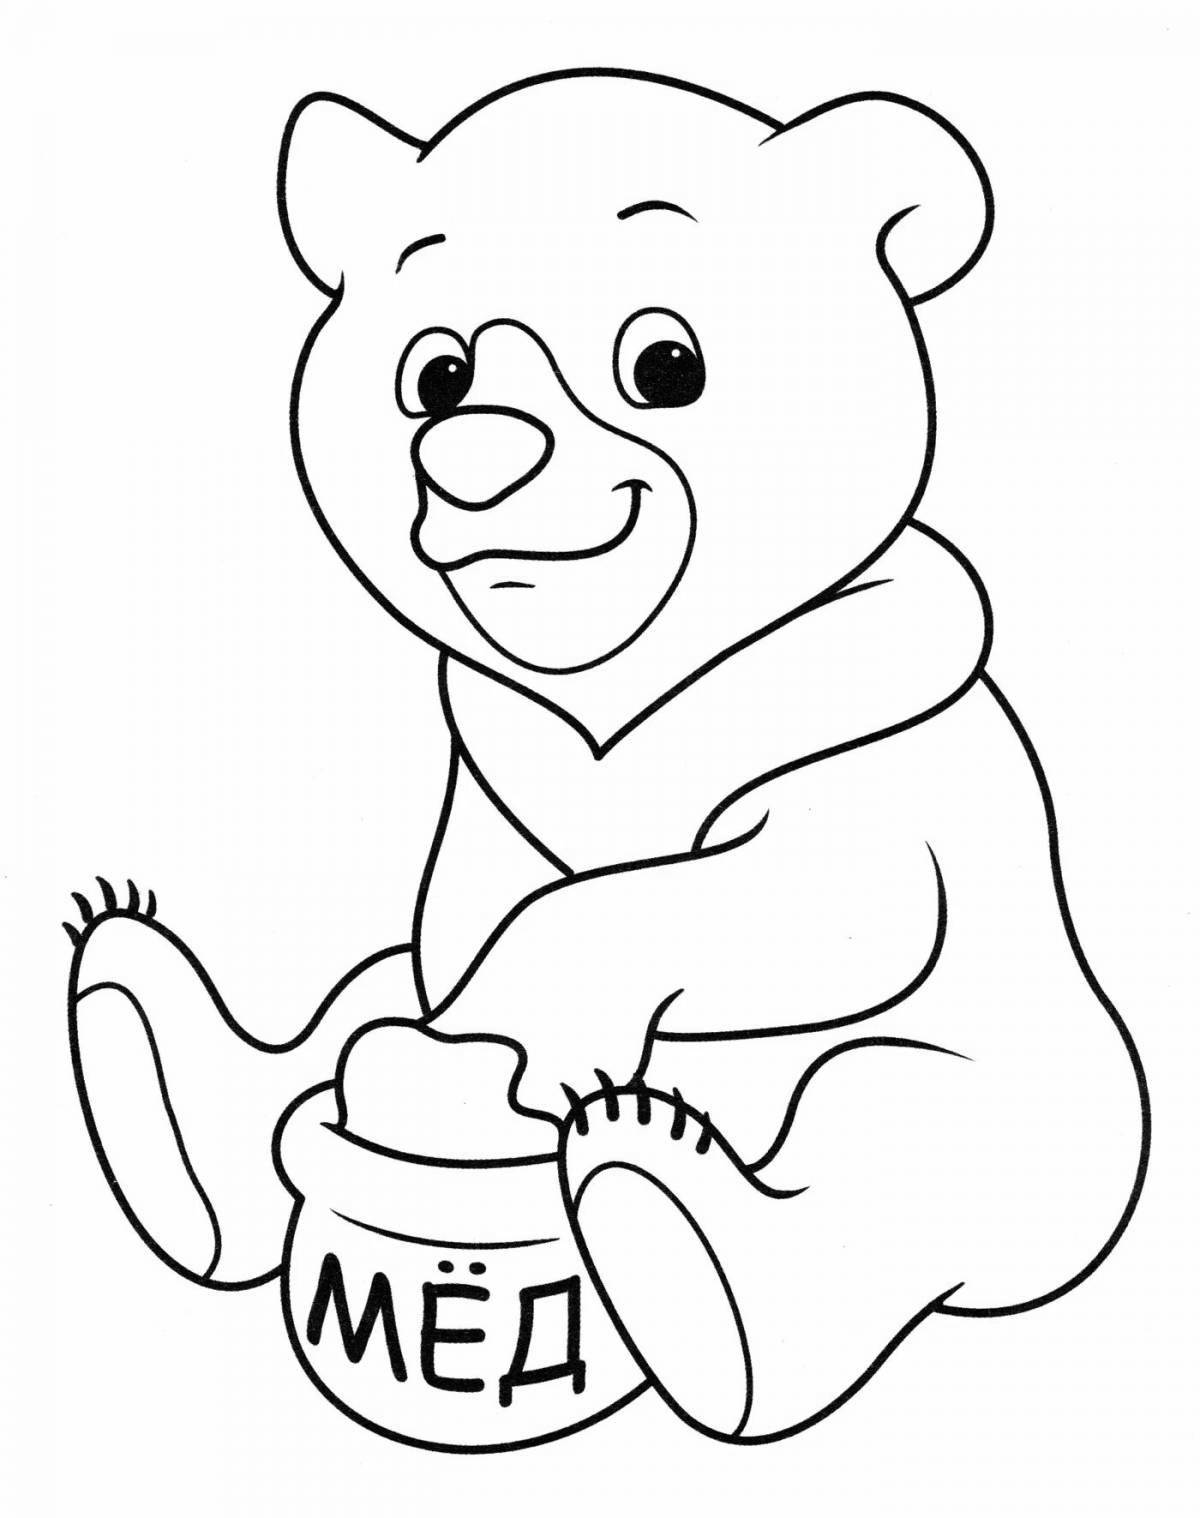 Funny teddy bear coloring book for 2-3 year olds